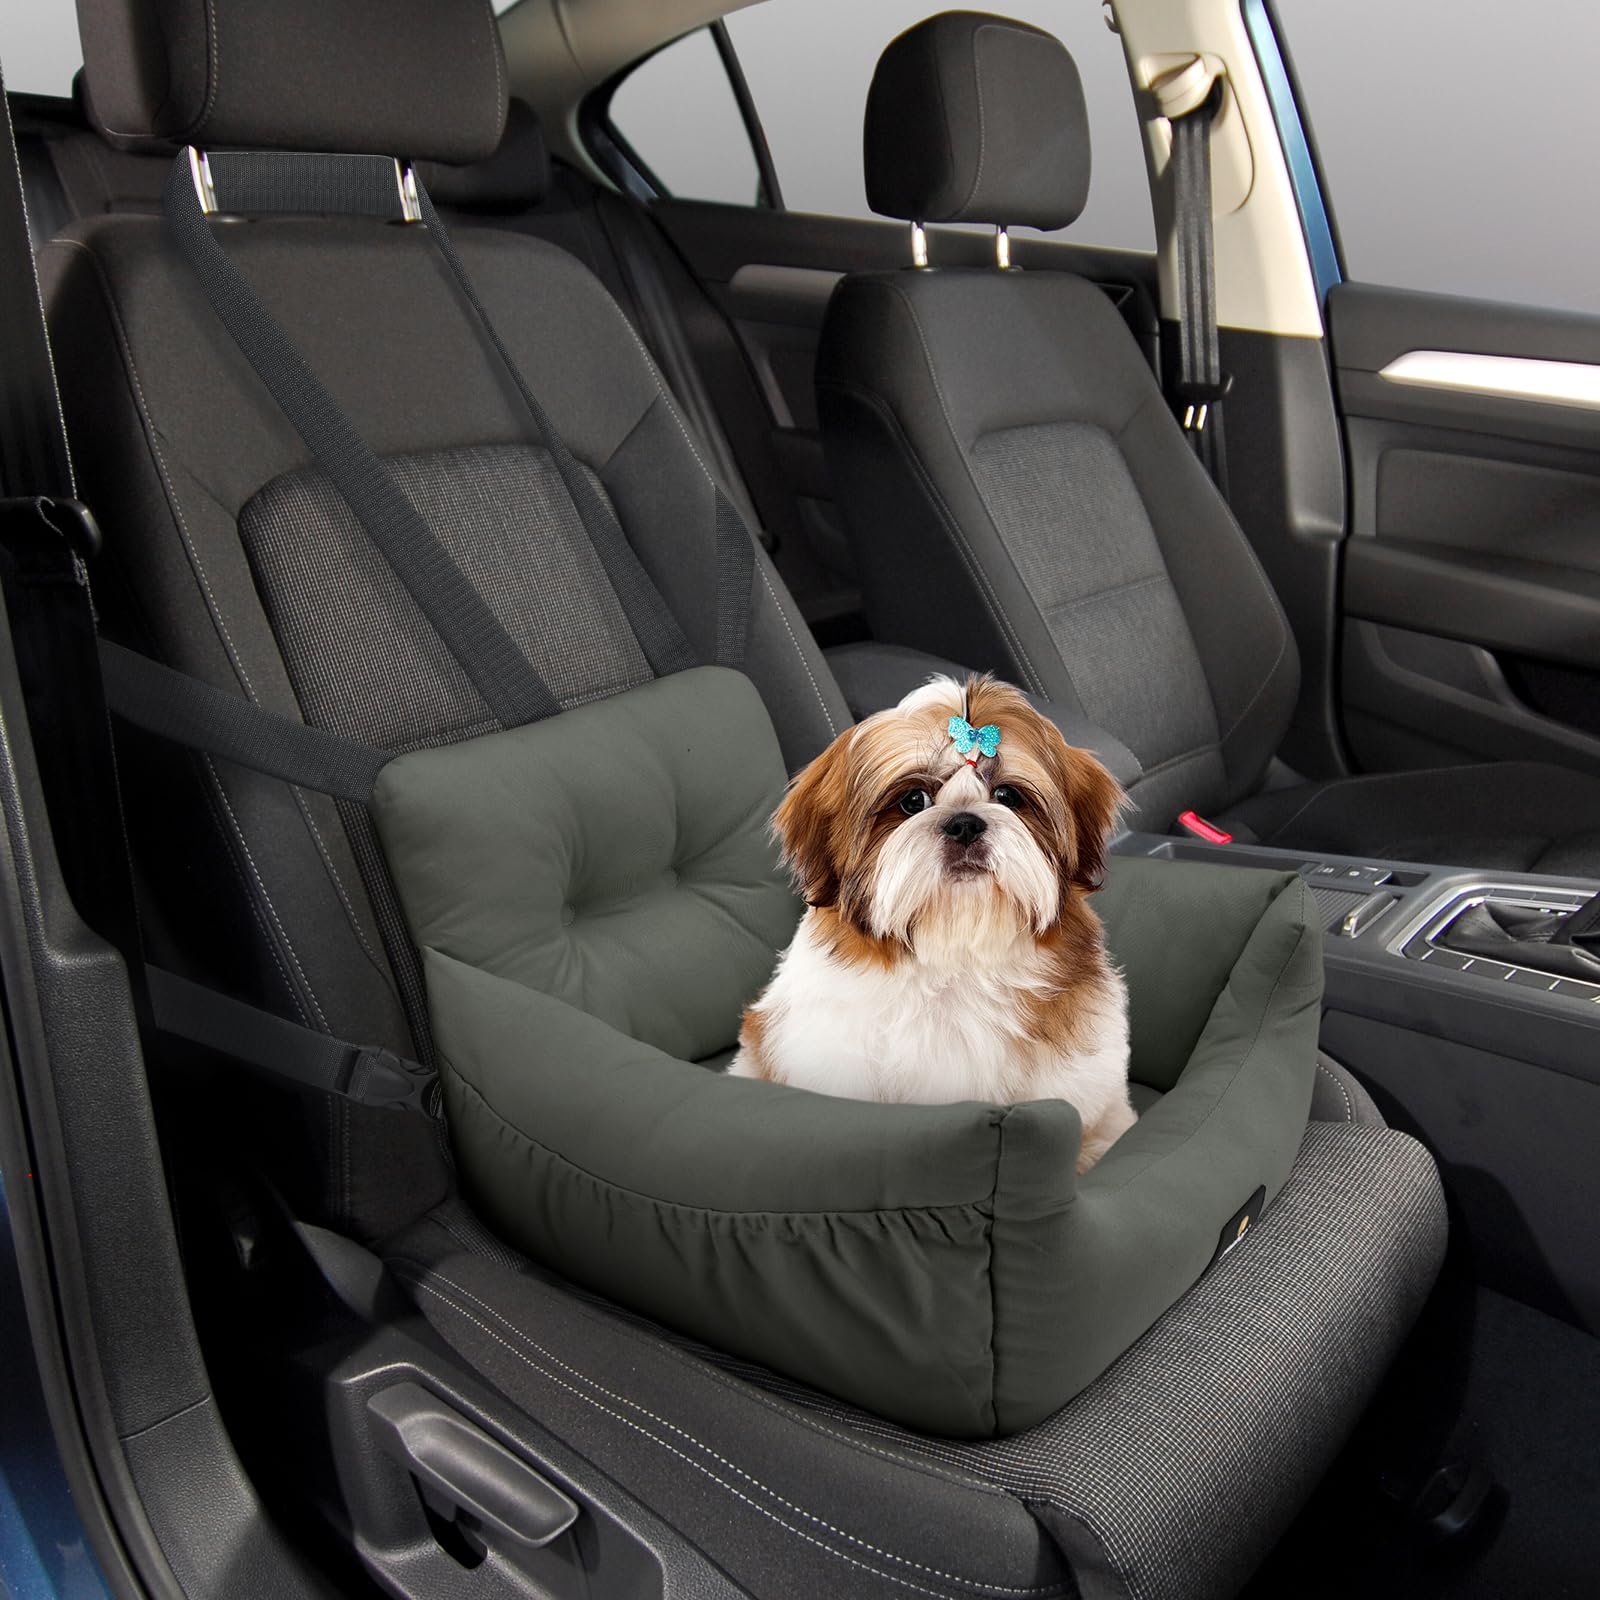 Veehoo Dog Car Seats for Small Dogs, Soft Cotton Dog Booster Seat, Washable & Portable Pet Carseat Travel Bed $22.49